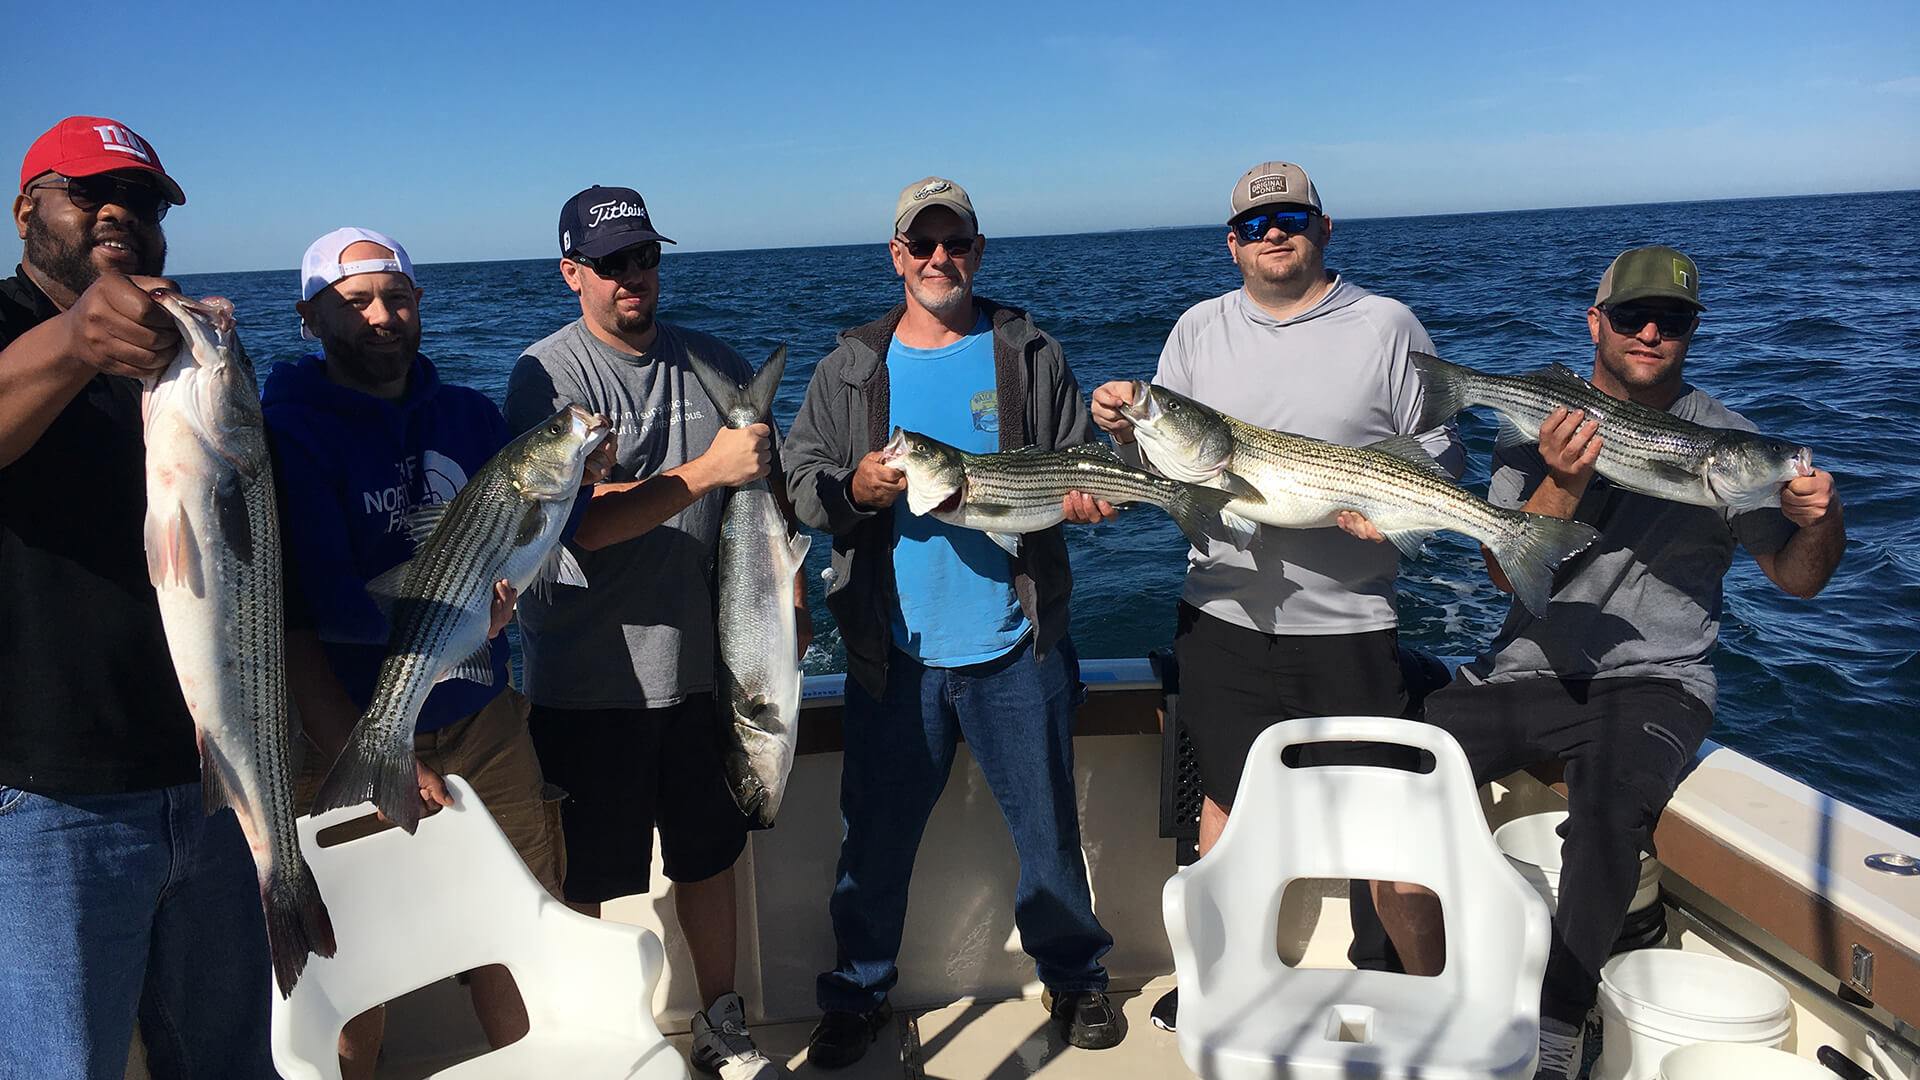 rhode island fishing charters with aces wild launching soon